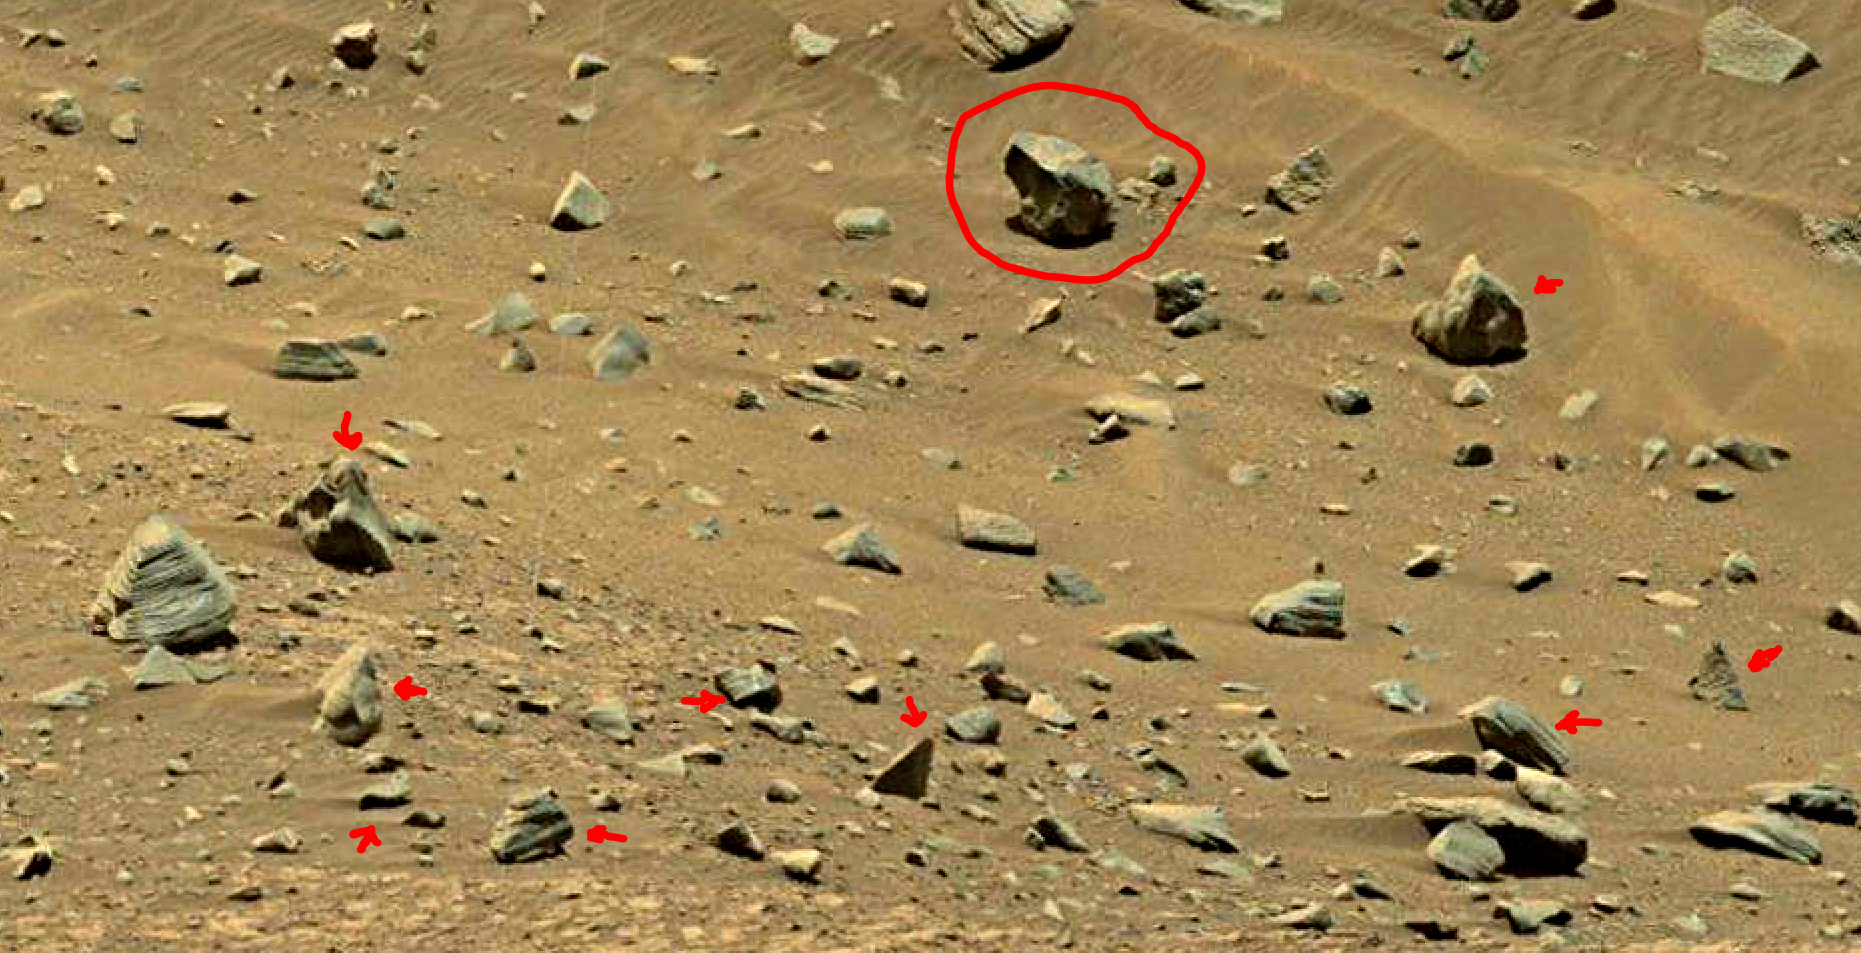 mars sol 1399 anomaly artifacts 5a1 was life on mars